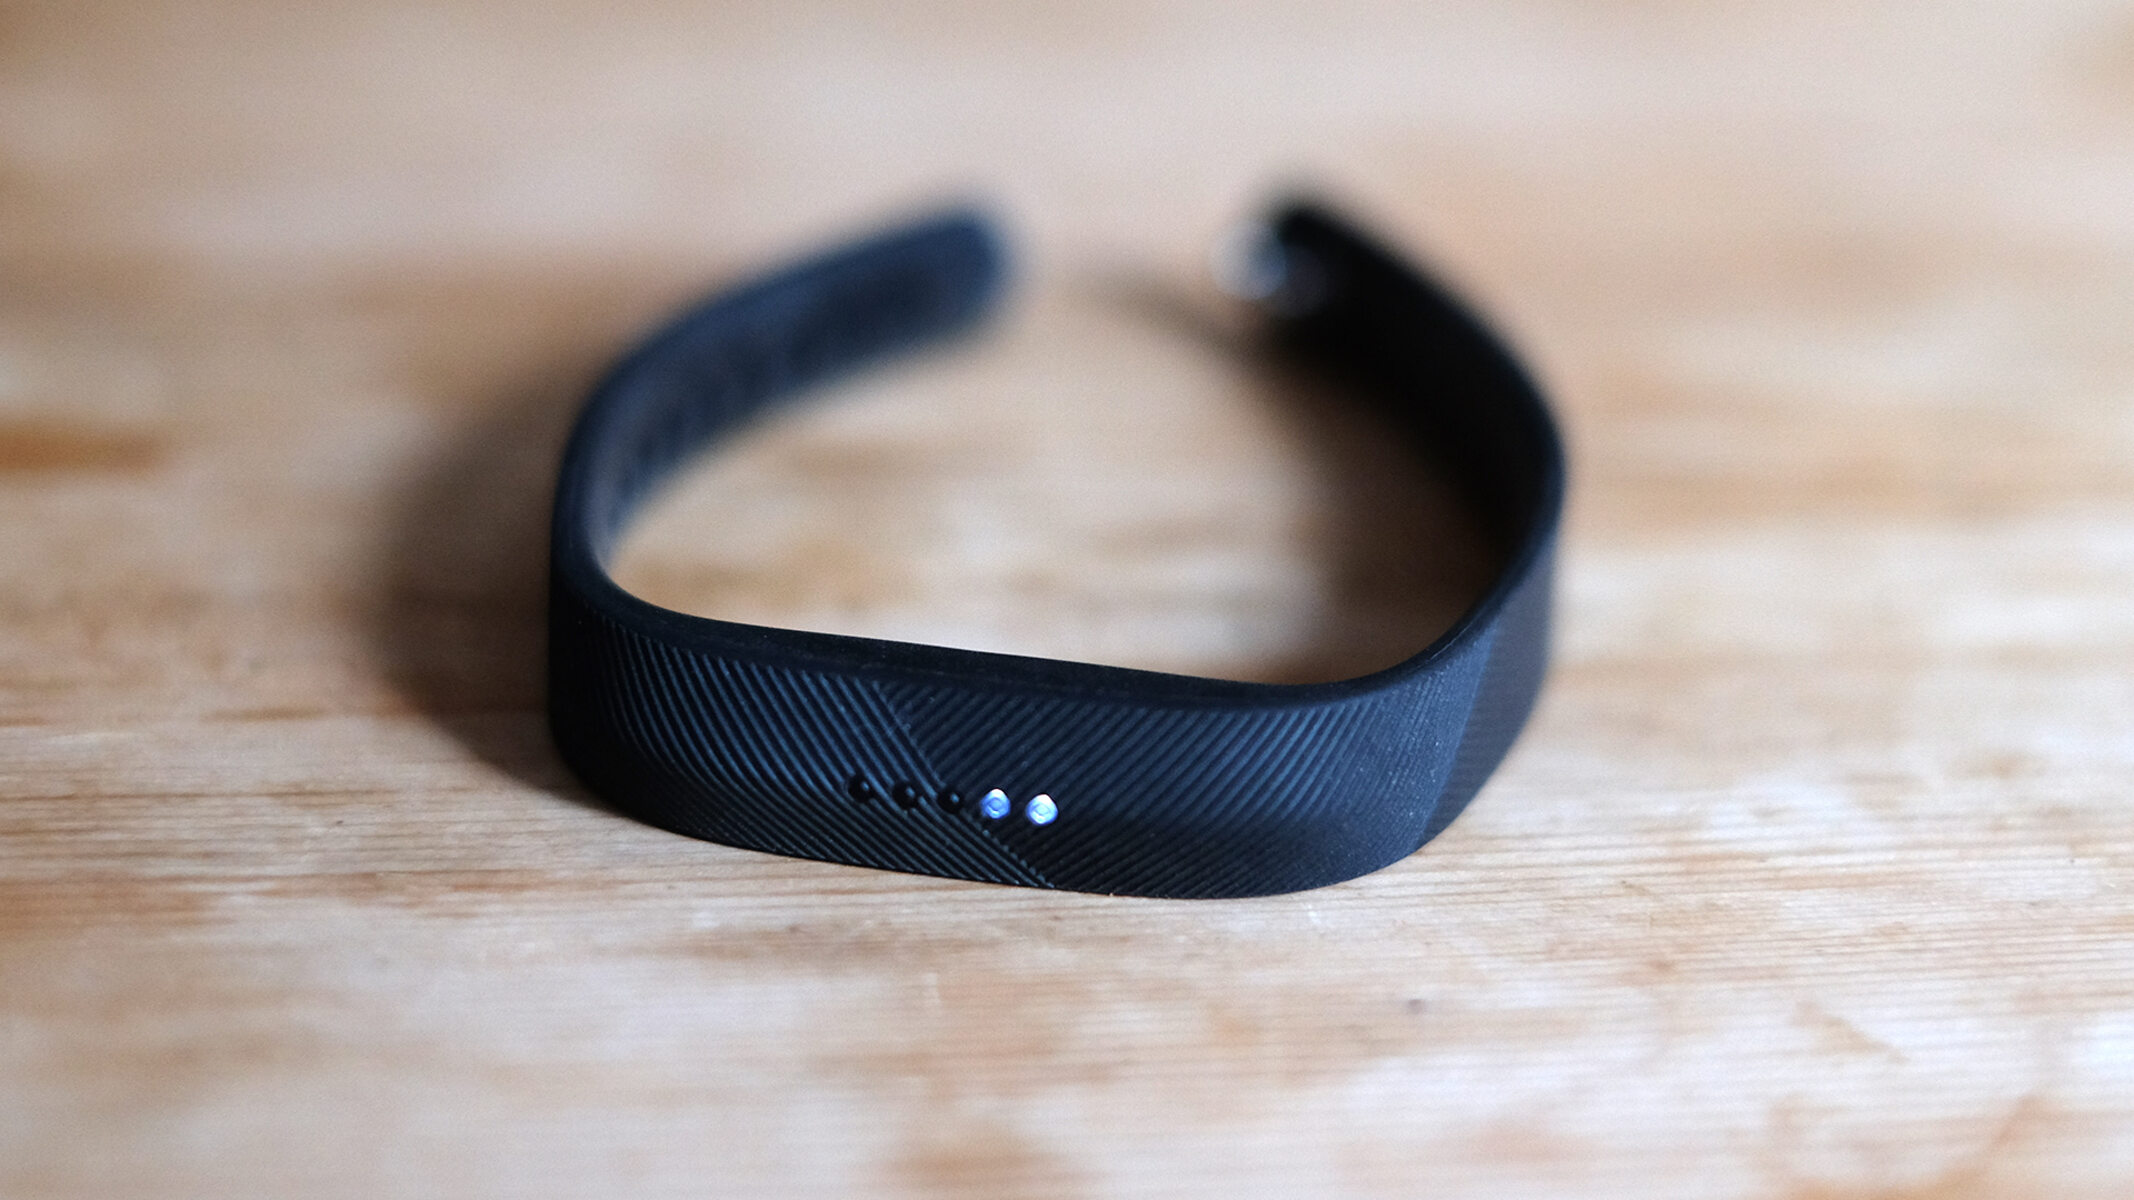 Flex Device Reset: A Step-by-Step Guide To Resetting Your Fitbit Flex Device